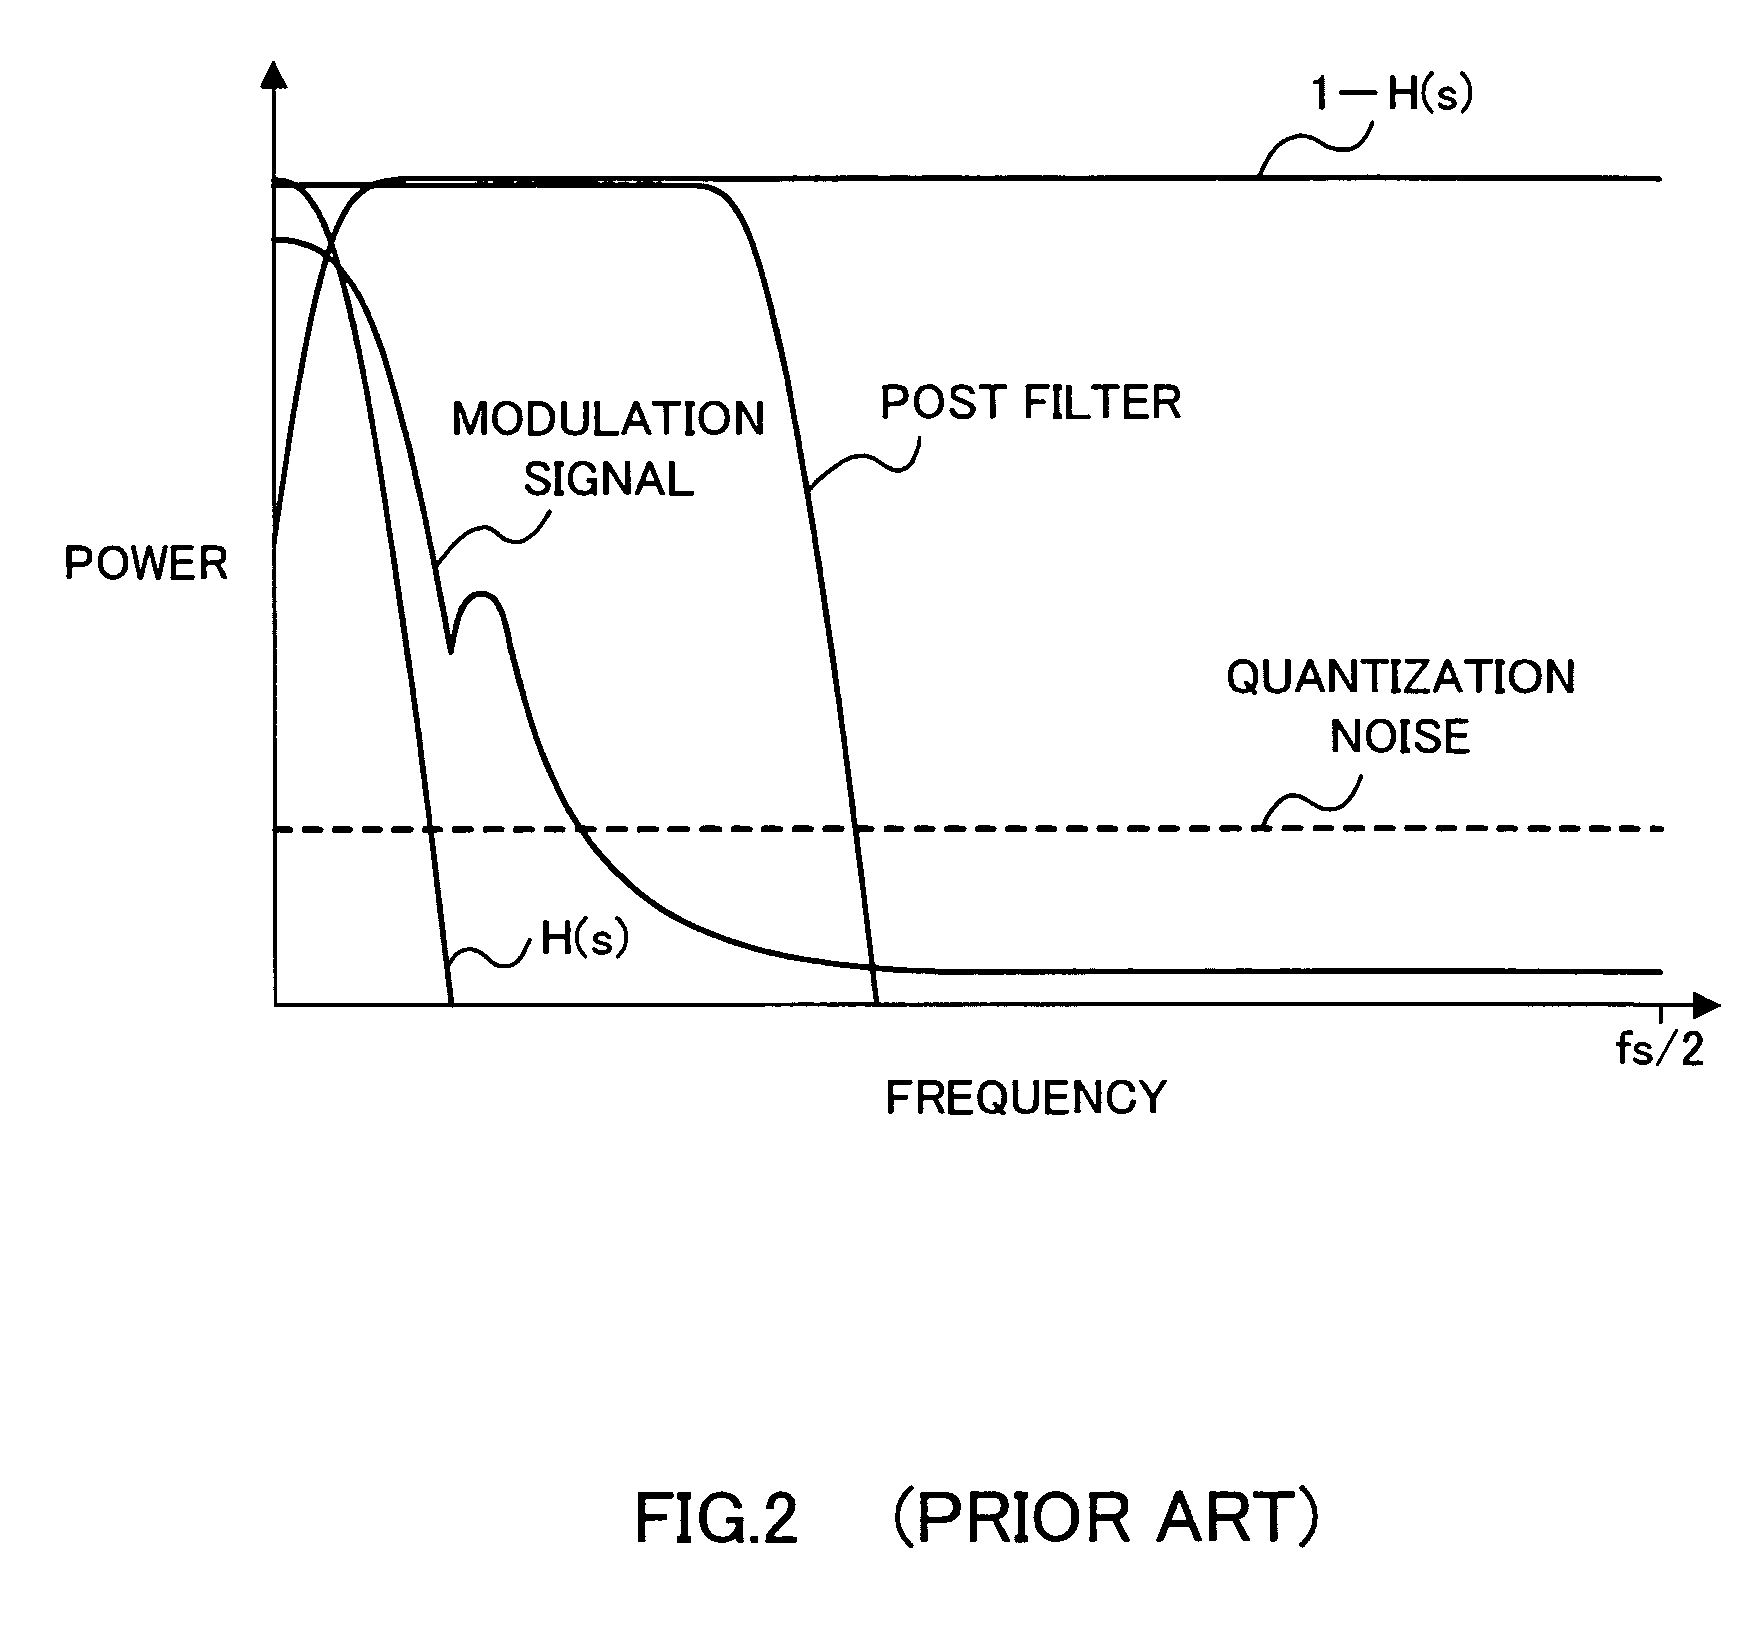 Two-point frequency modulation apparatus